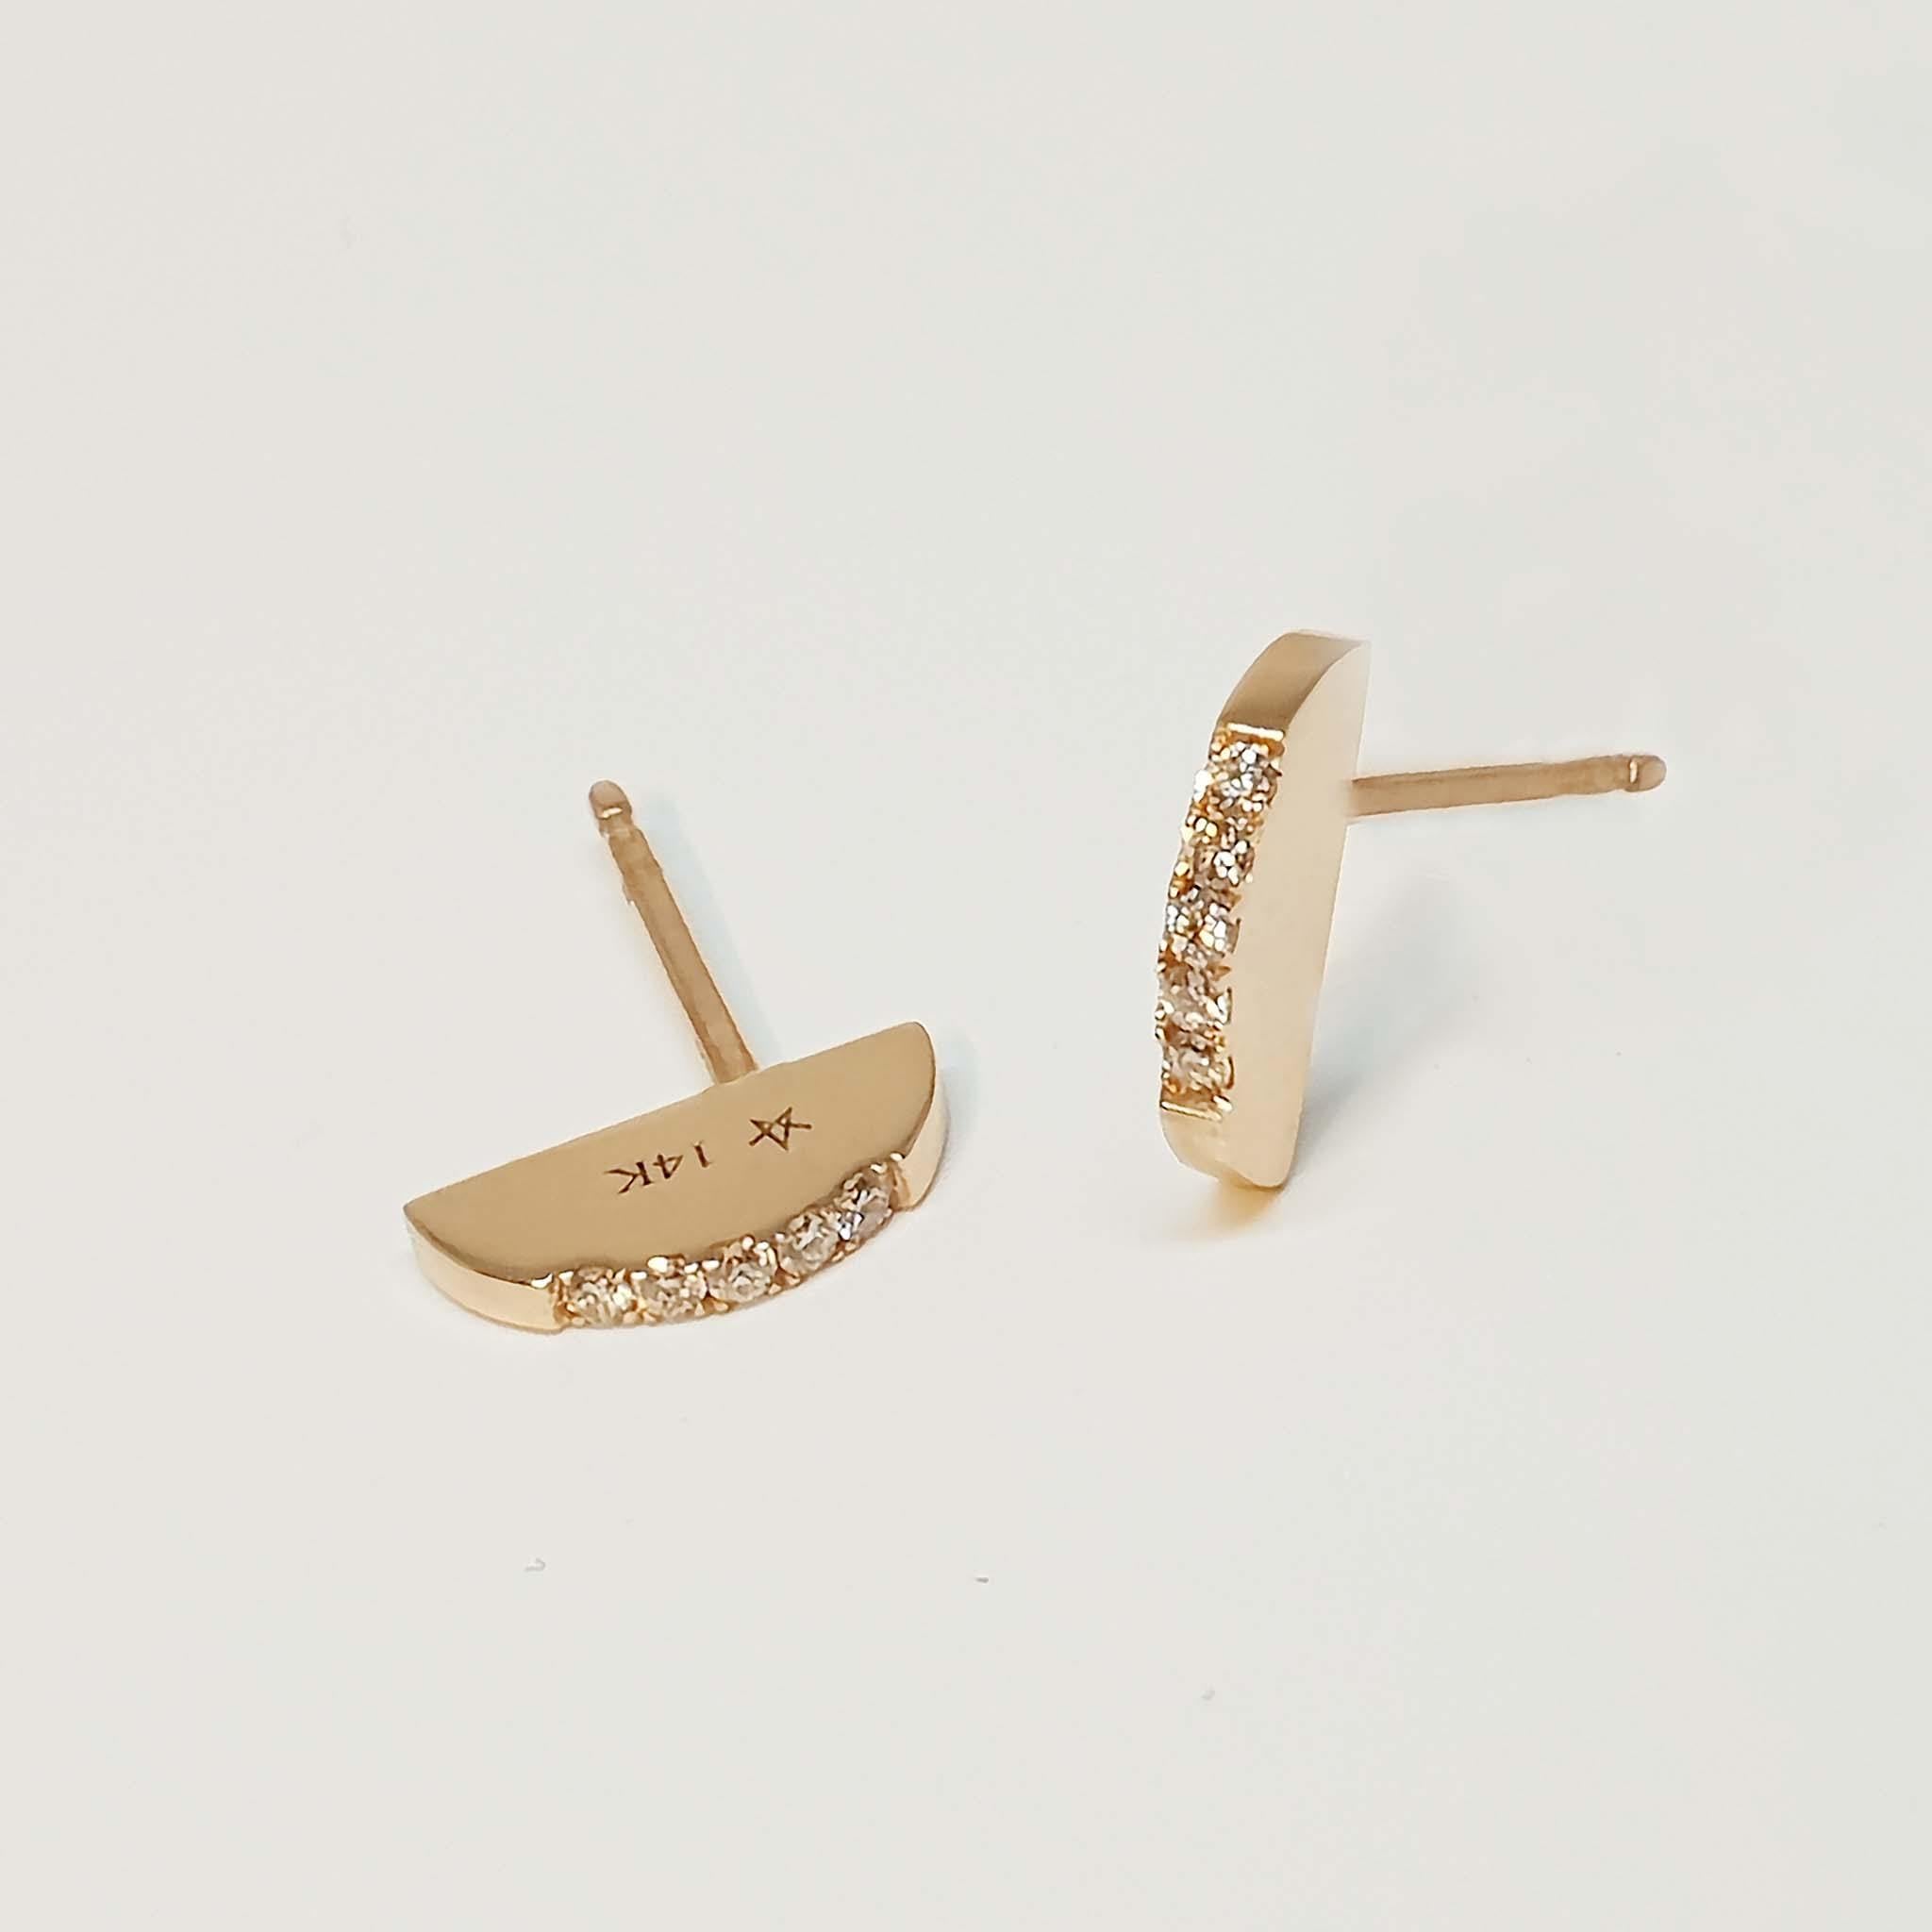 Akila Earrings - Dainty semi-circle stud earrings encrusted with 5 round diamonds set in pave. Made in 14K Gold. Daily fine jewellery made in Sydney.